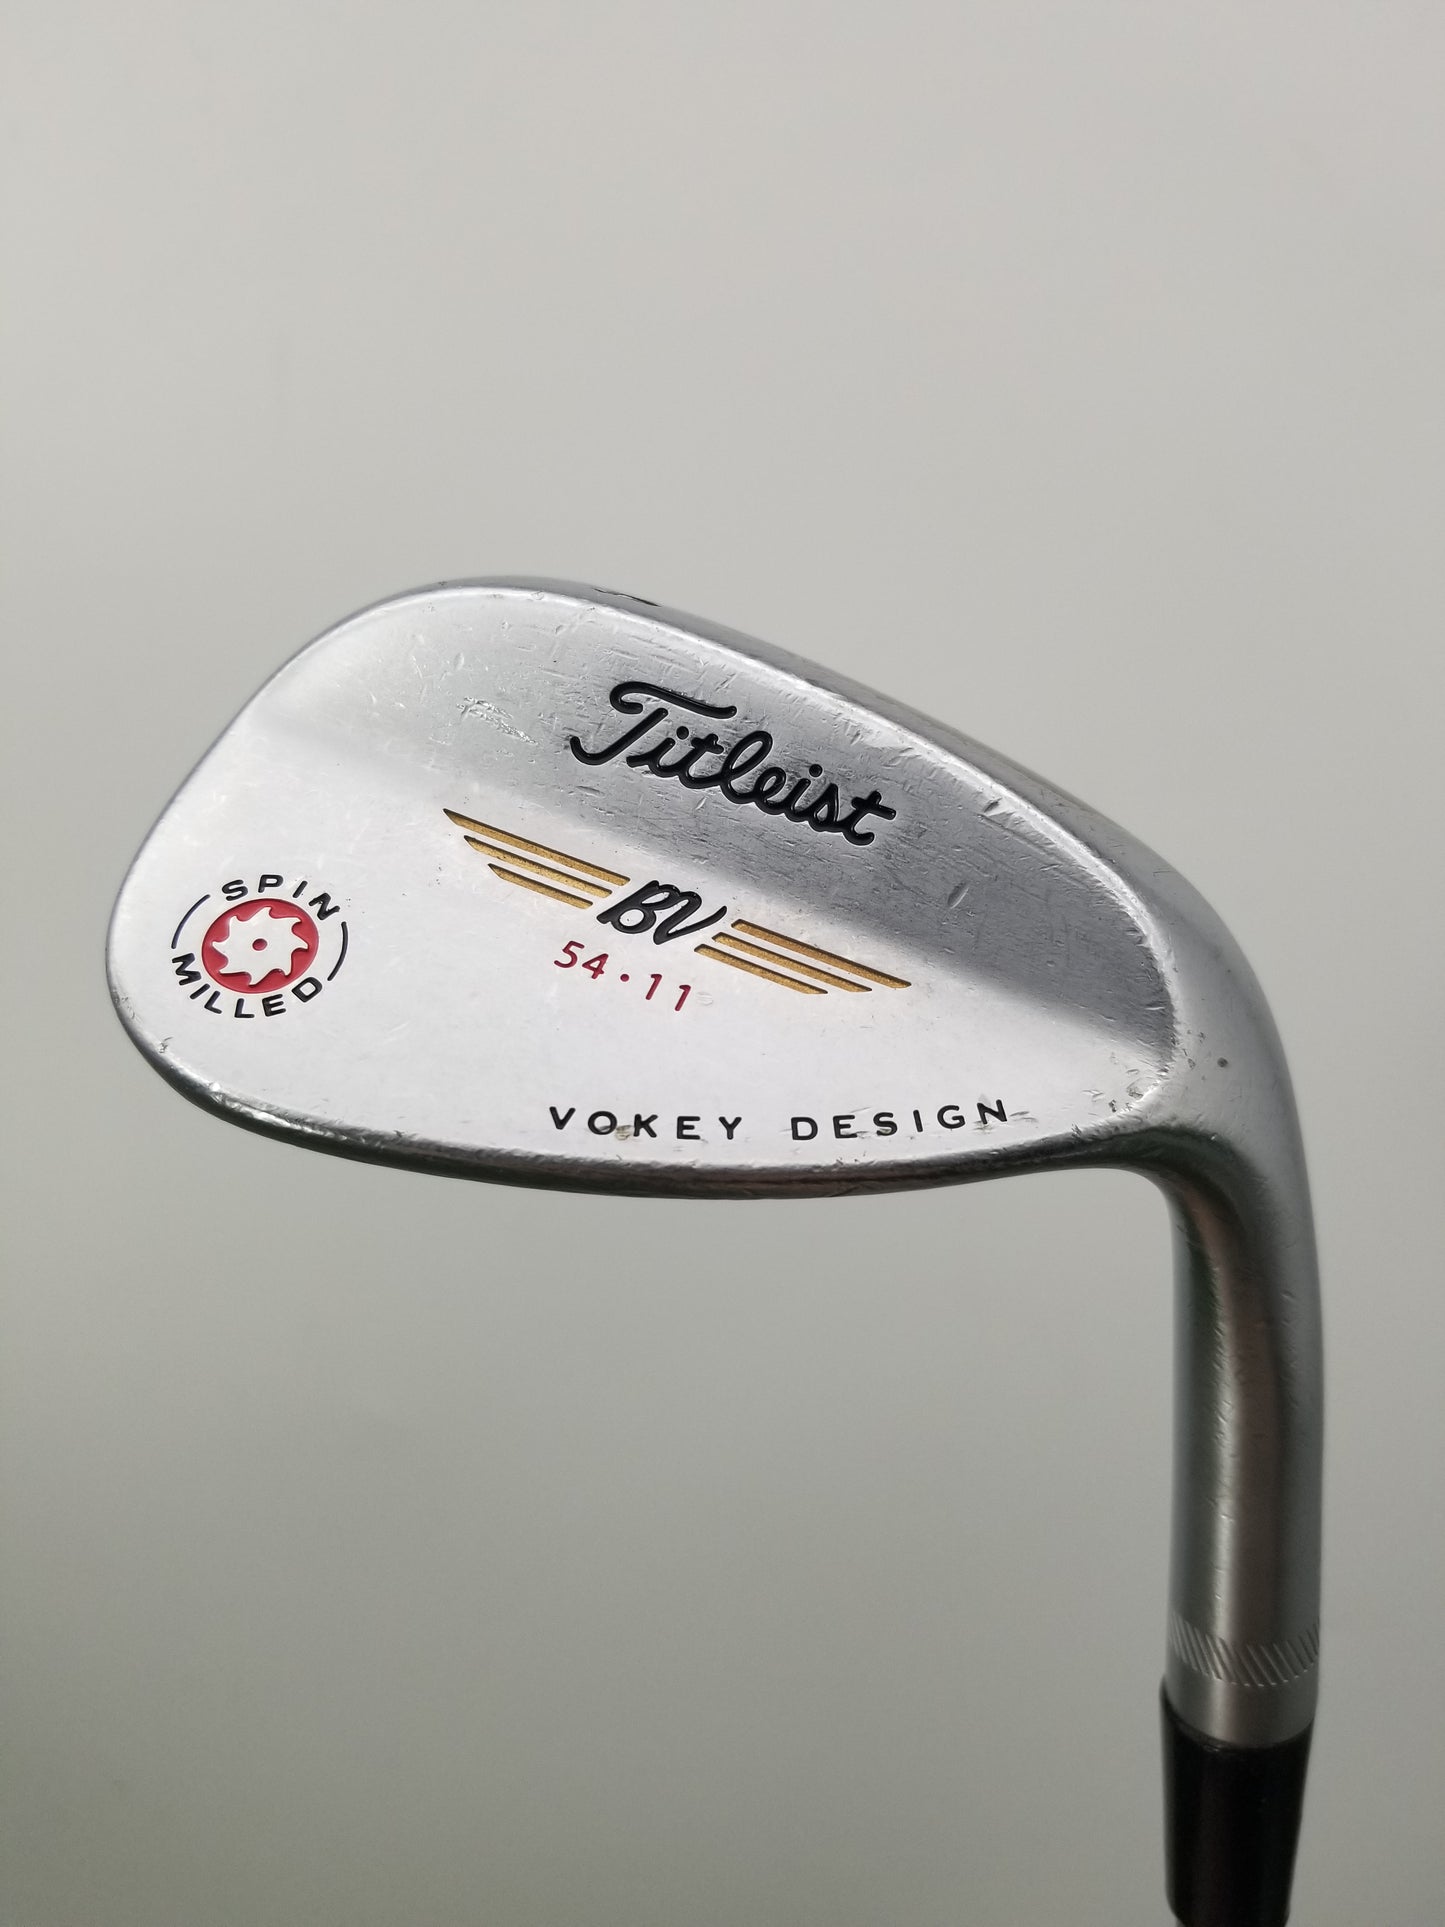 2009 TITLEIST VOKEY SPIN MILLED CHROME WEDGE 54*/11 REGULAR ACCRA 70I 36" POOR